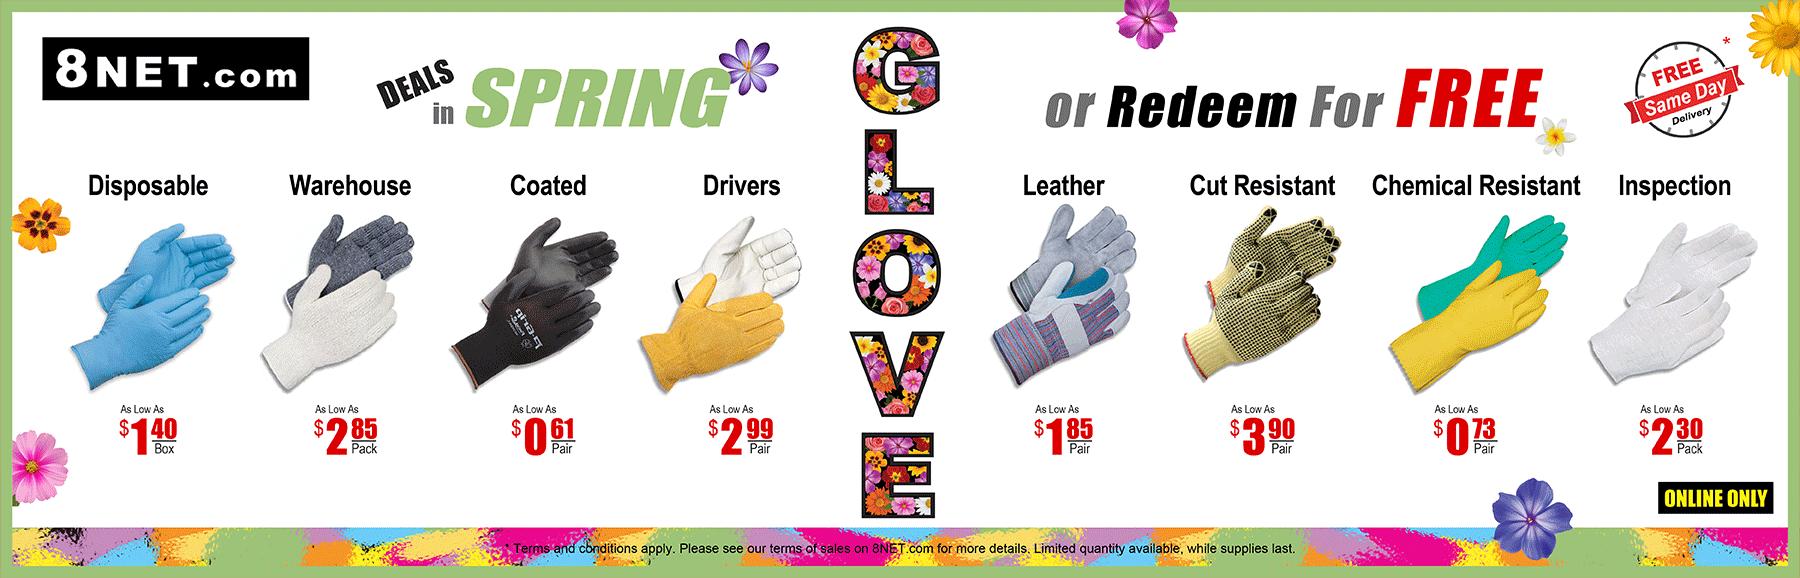 https://www.8net.com/safety-products/gloves-2.html